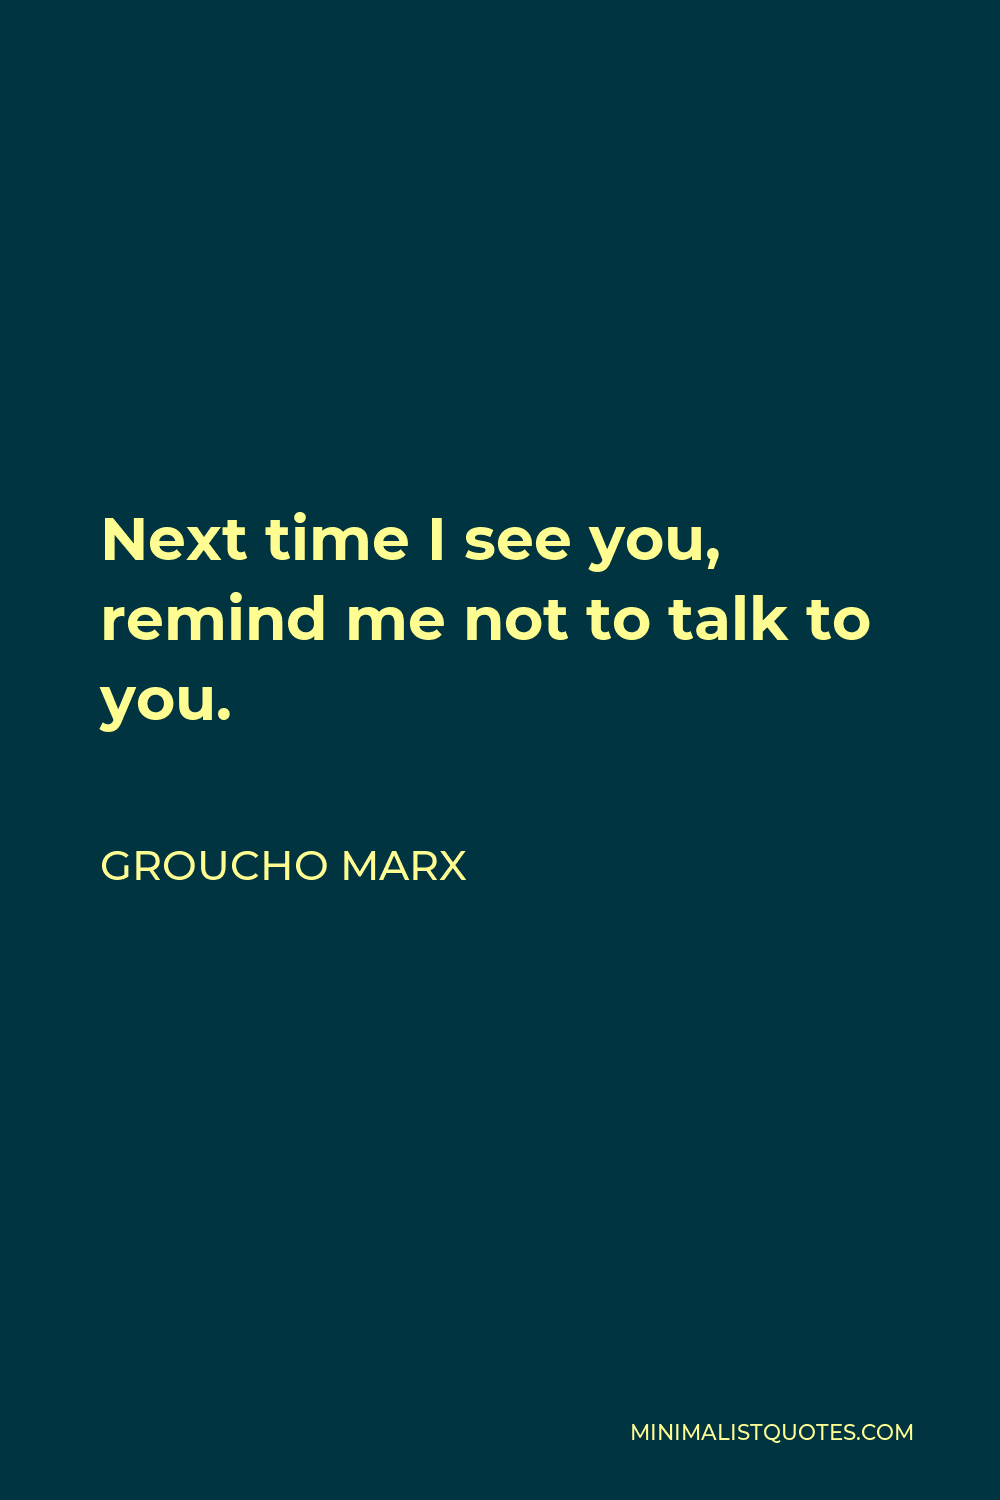 Groucho Marx Quote - Next time I see you, remind me not to talk to you.